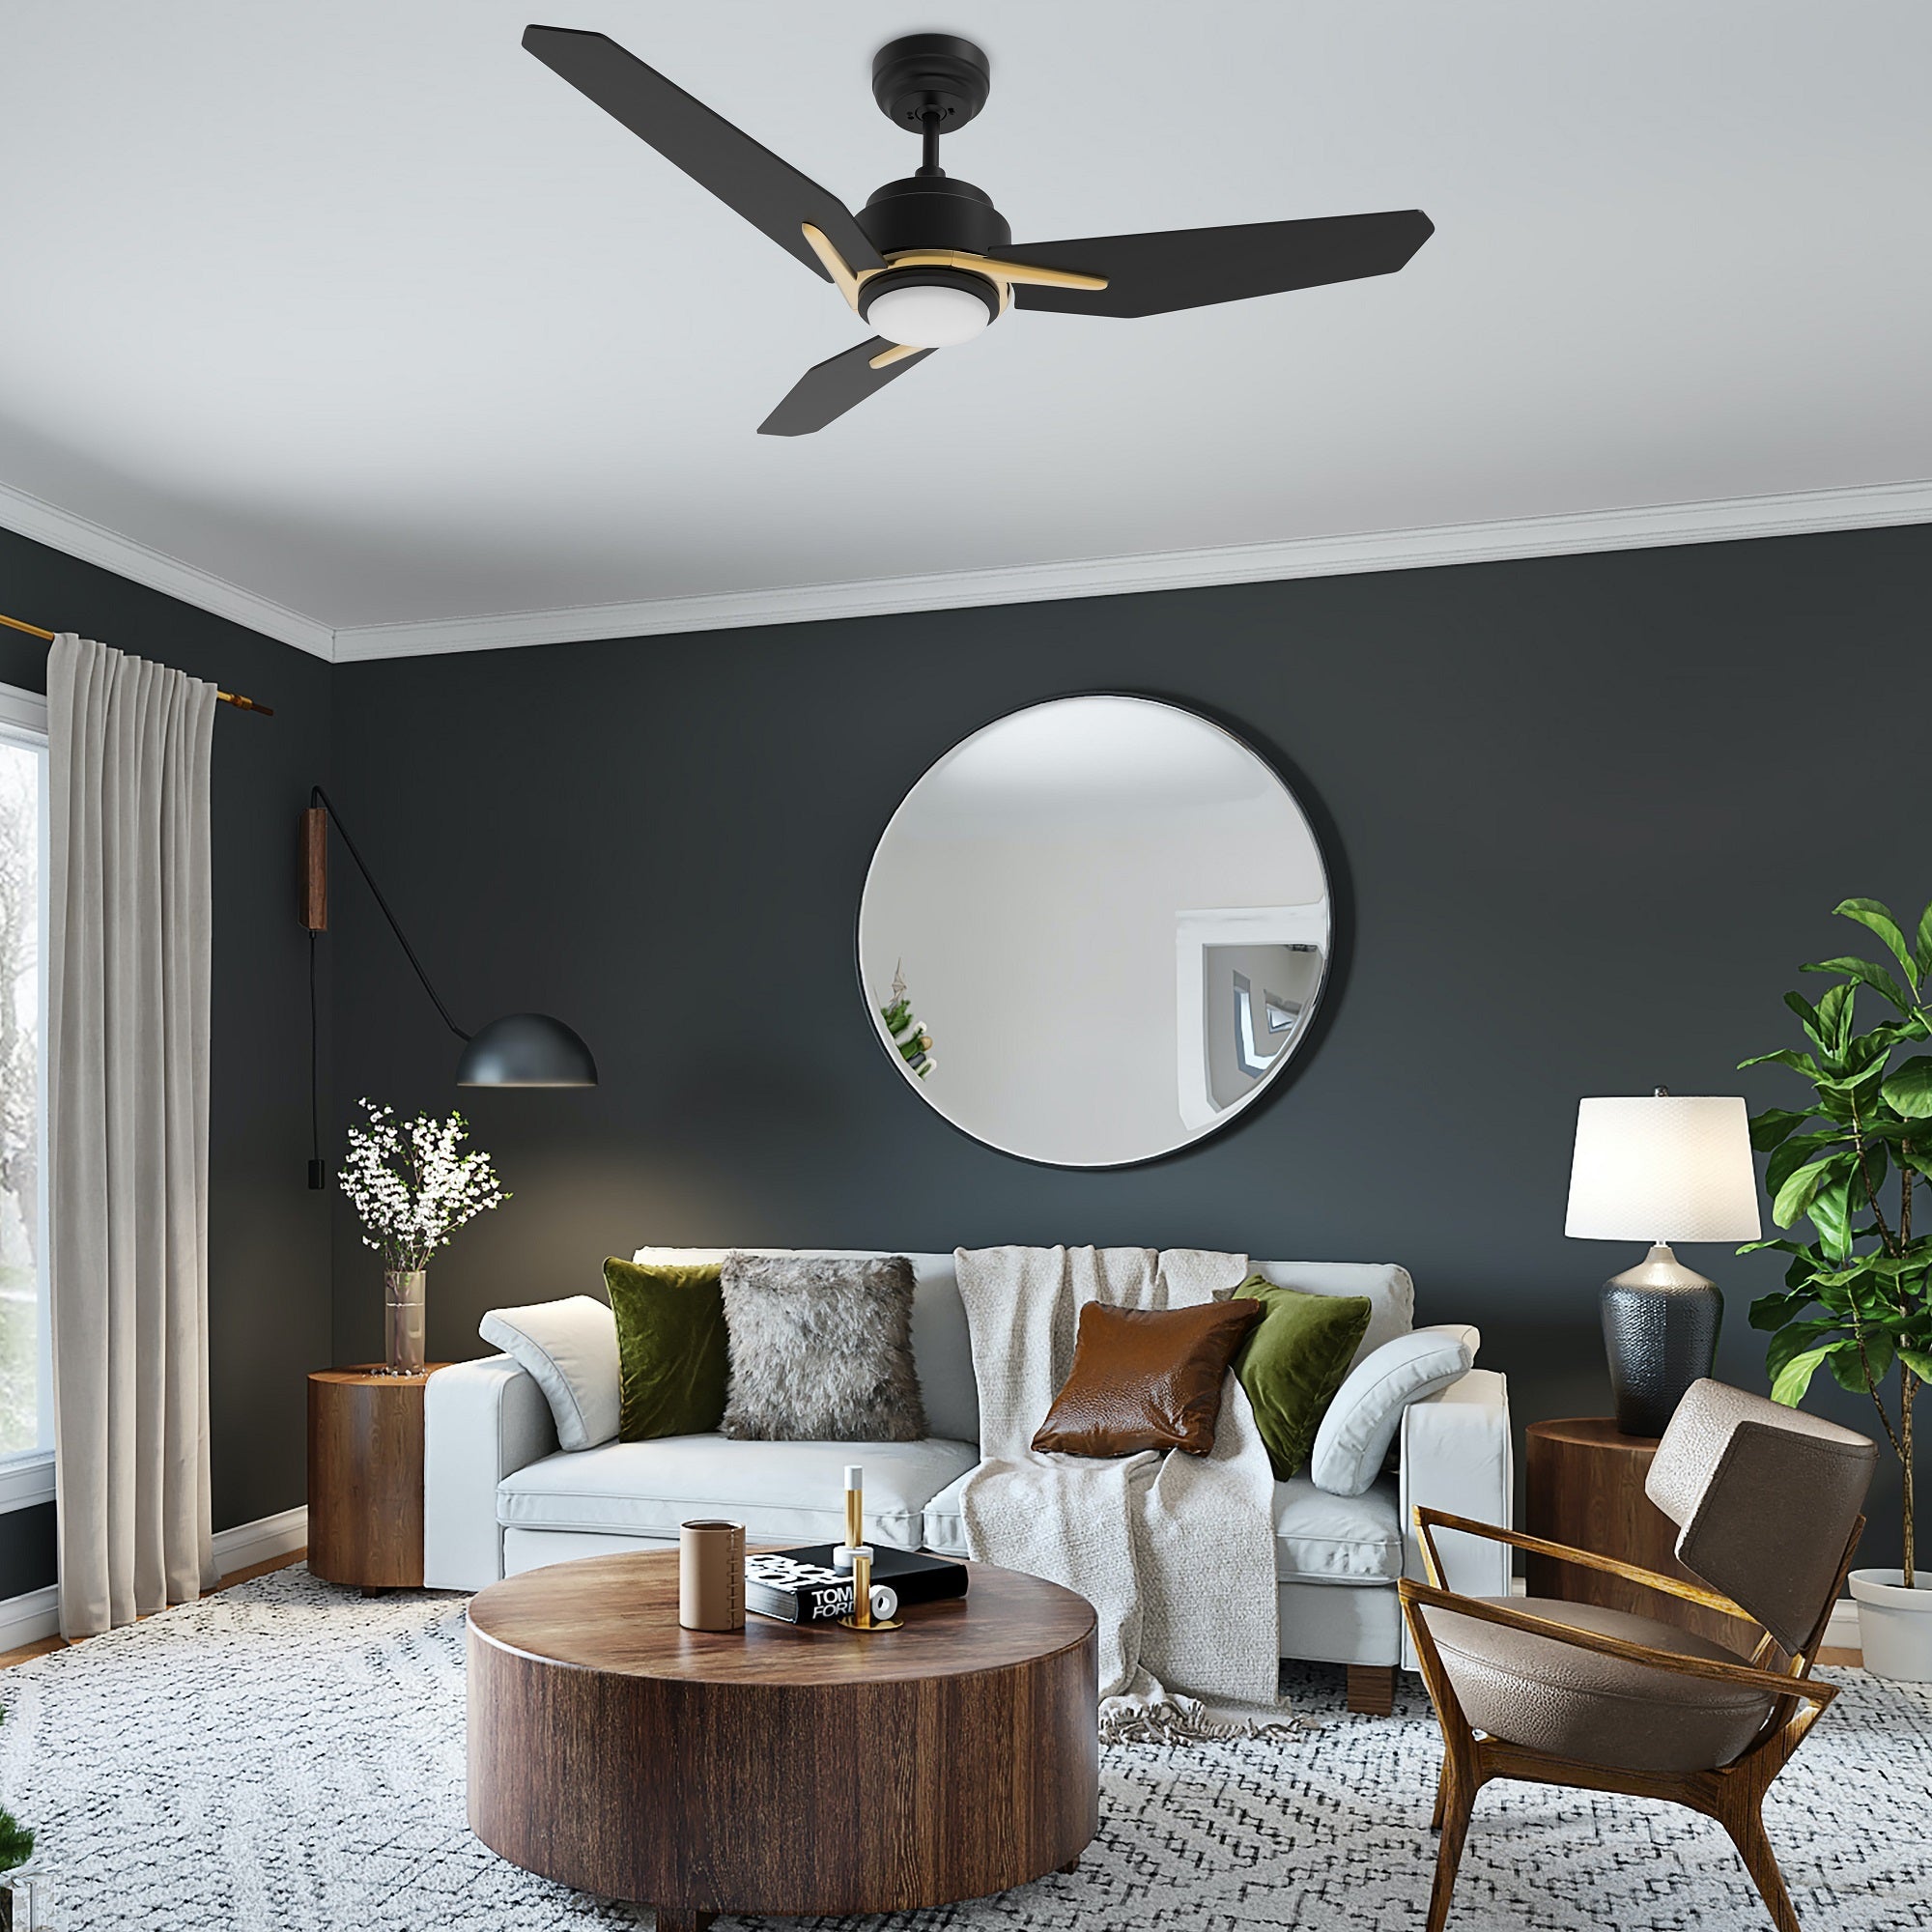 Smafan Tilbury 48&#39;&#39; smart ceiling fan fan features Remote control, Wi-Fi apps, Siri Shortcut and Voice control technology (compatible with Amazon Alexa and Google Home Assistant ) to set fan preferences.